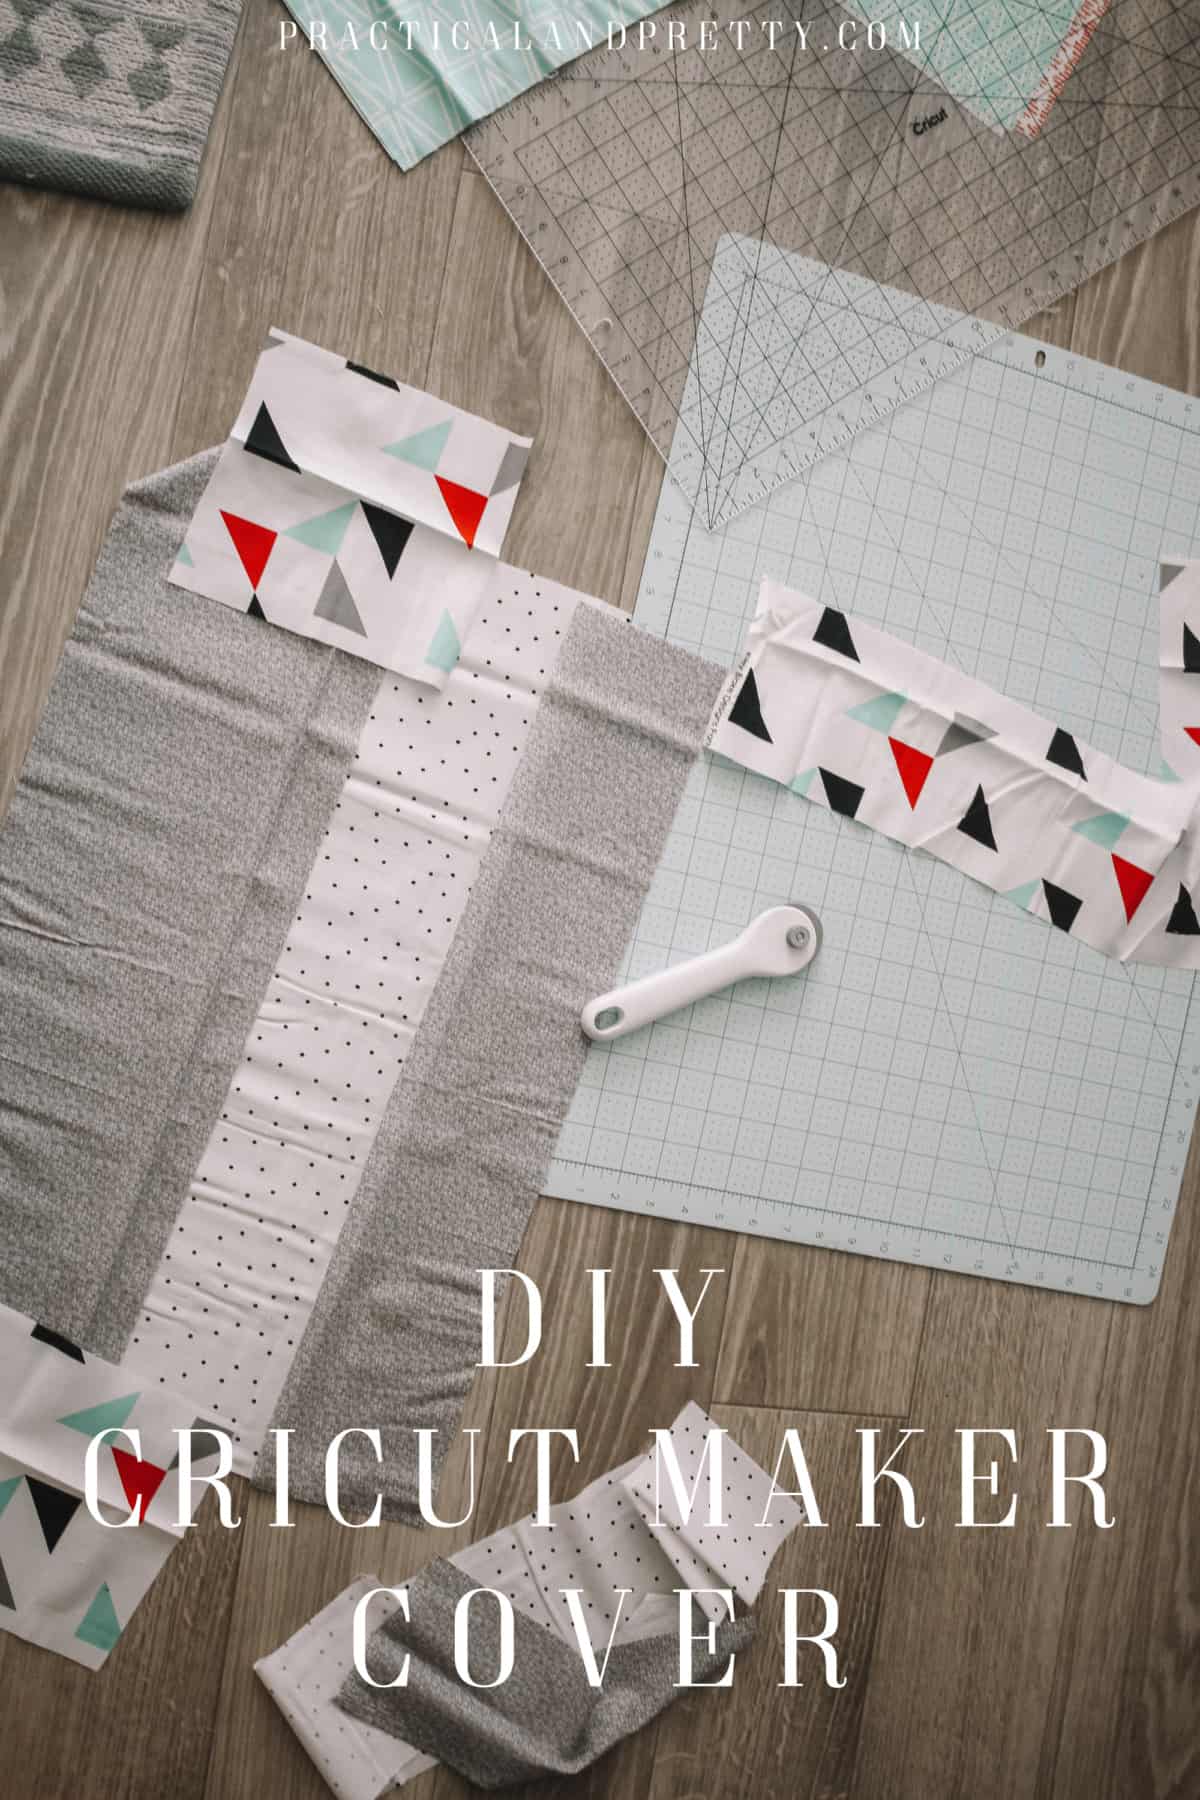 Make your own DIY dust cover for your Cricut Maker or any Explore machine! You won't need much fabric OR time!